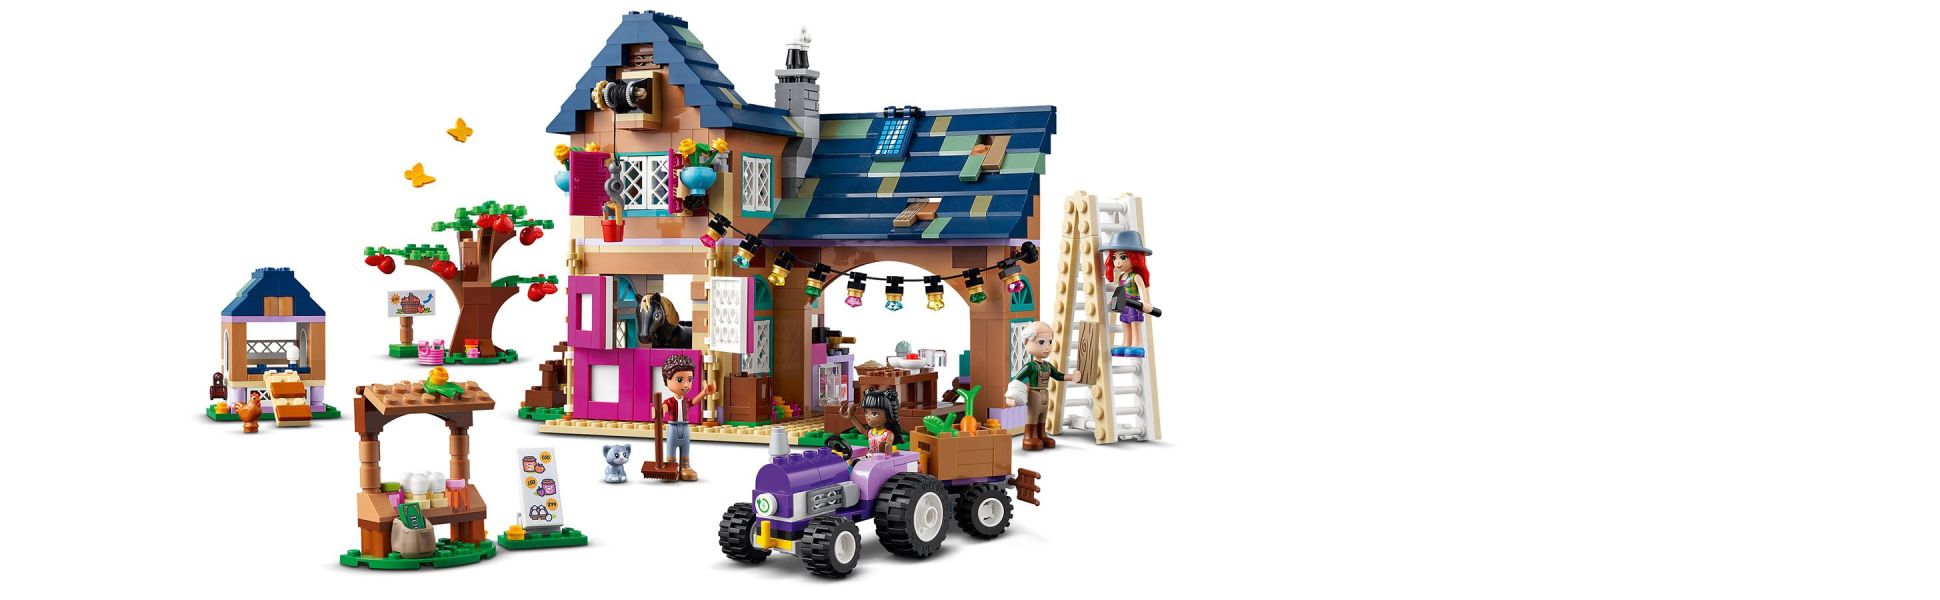 LEGO Friends Organic Farm House Set 41721 with Toy Horse, Stable, Tractor  and Trailer plus Animal Figures, for Kids, Girls and Boys Aged 7+ 